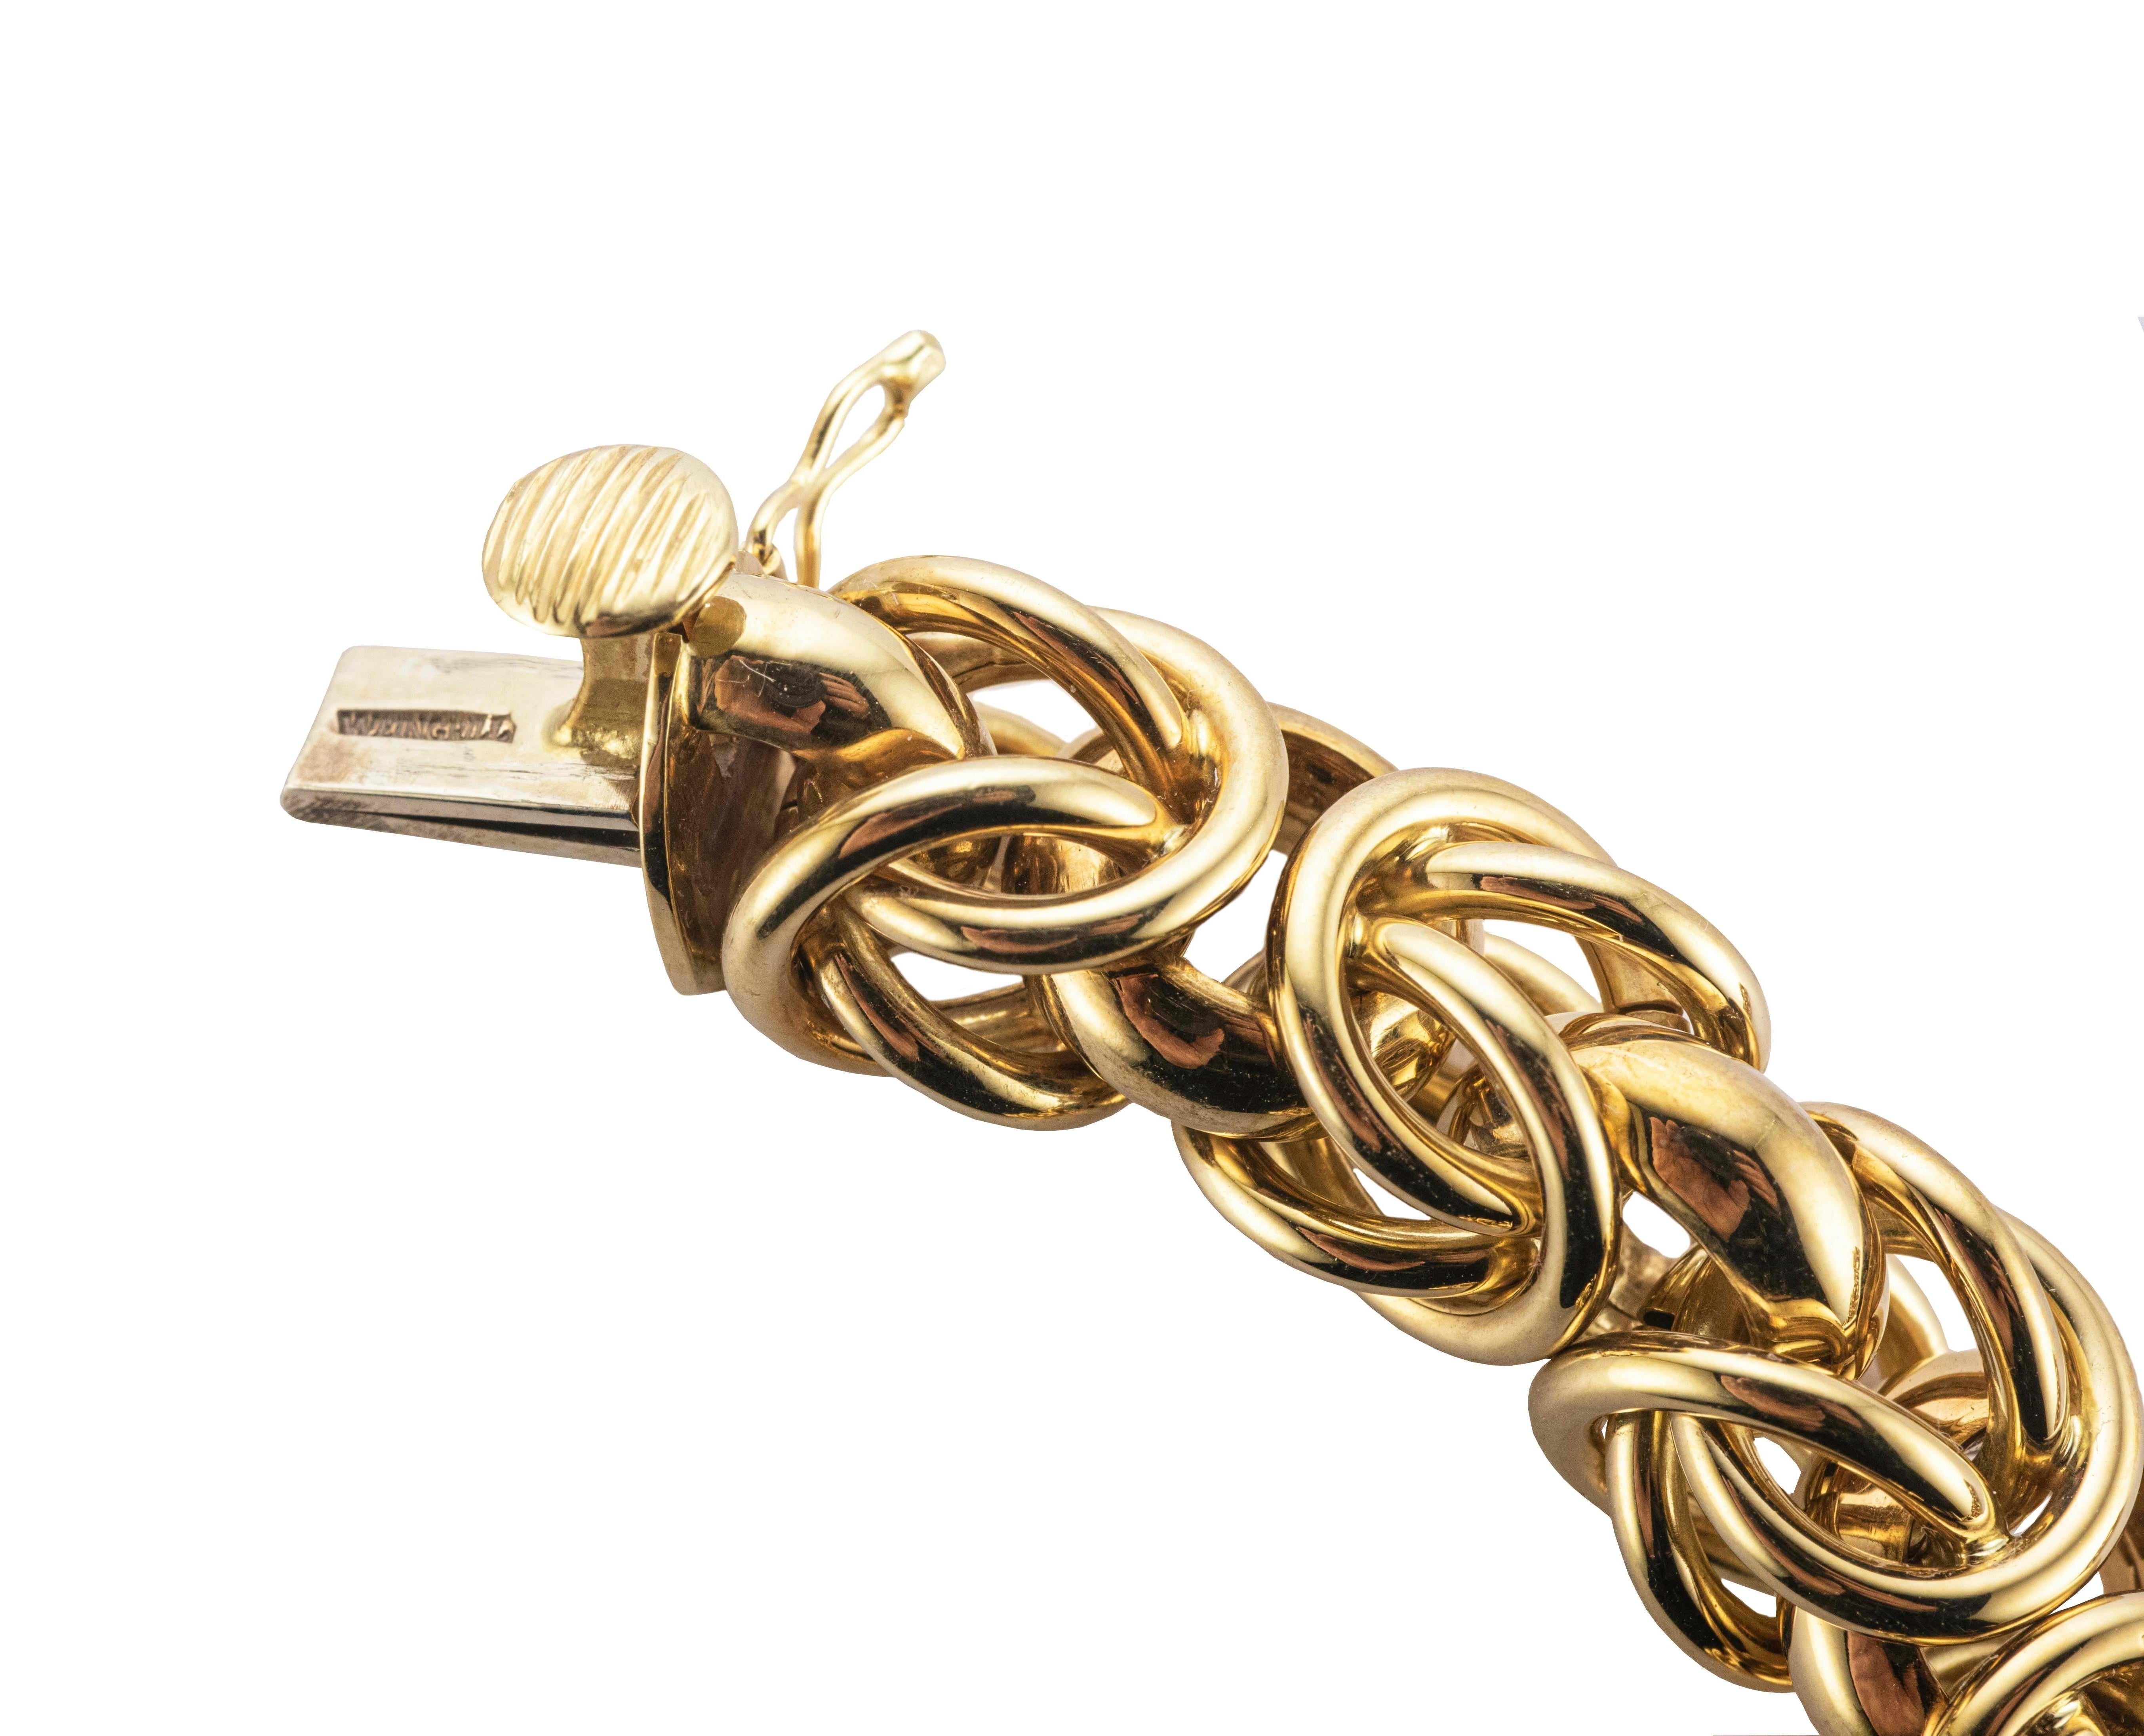 Handmade in Verona, Italy, from Carlo Weingrill witch name is synonymous of high quality and excellence of materials and craftsmanship since 1879.

A fine and solid 18 Karat woven link bracelet.
The design is inspired from sixties jewelry and the